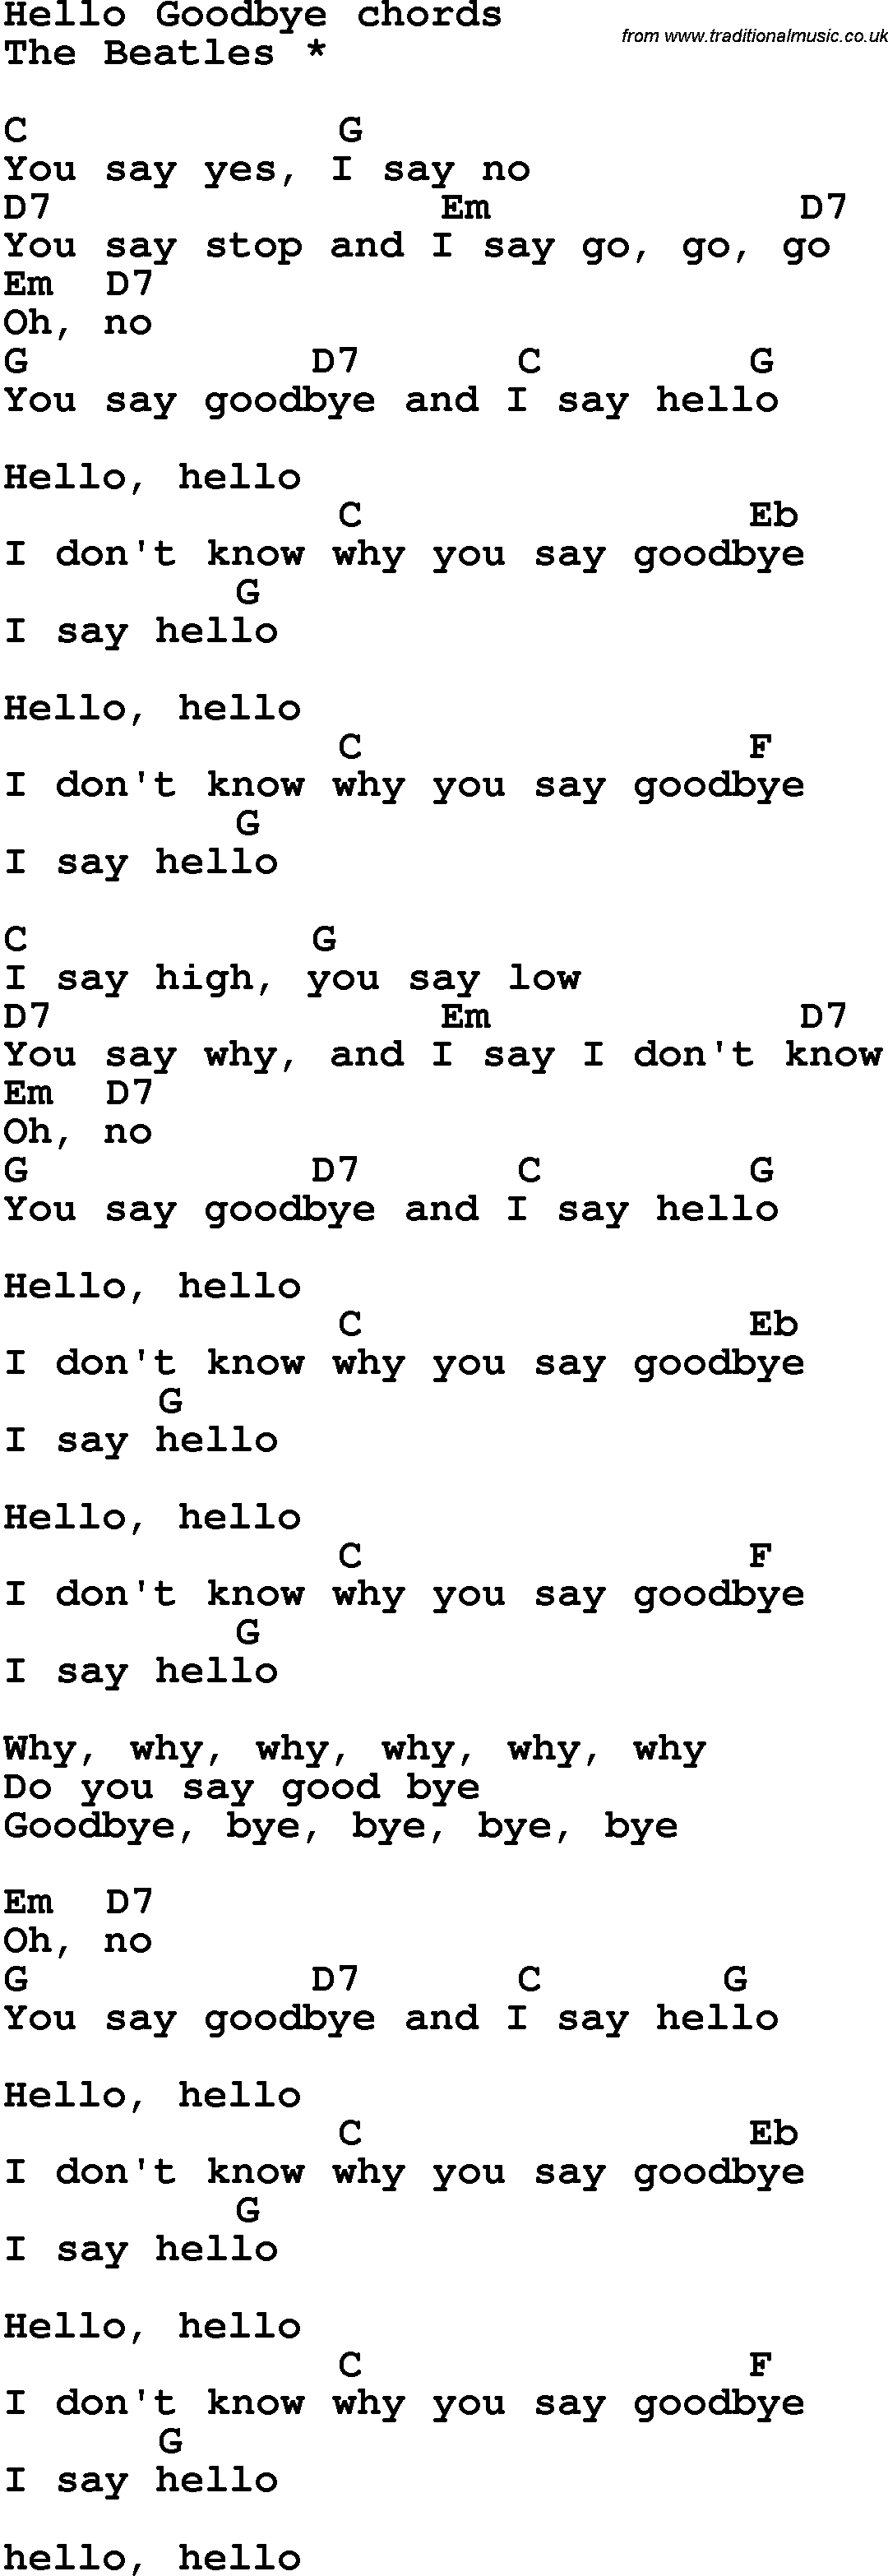 Song Lyrics with guitar chords for Hello Goodbye - The Beatles